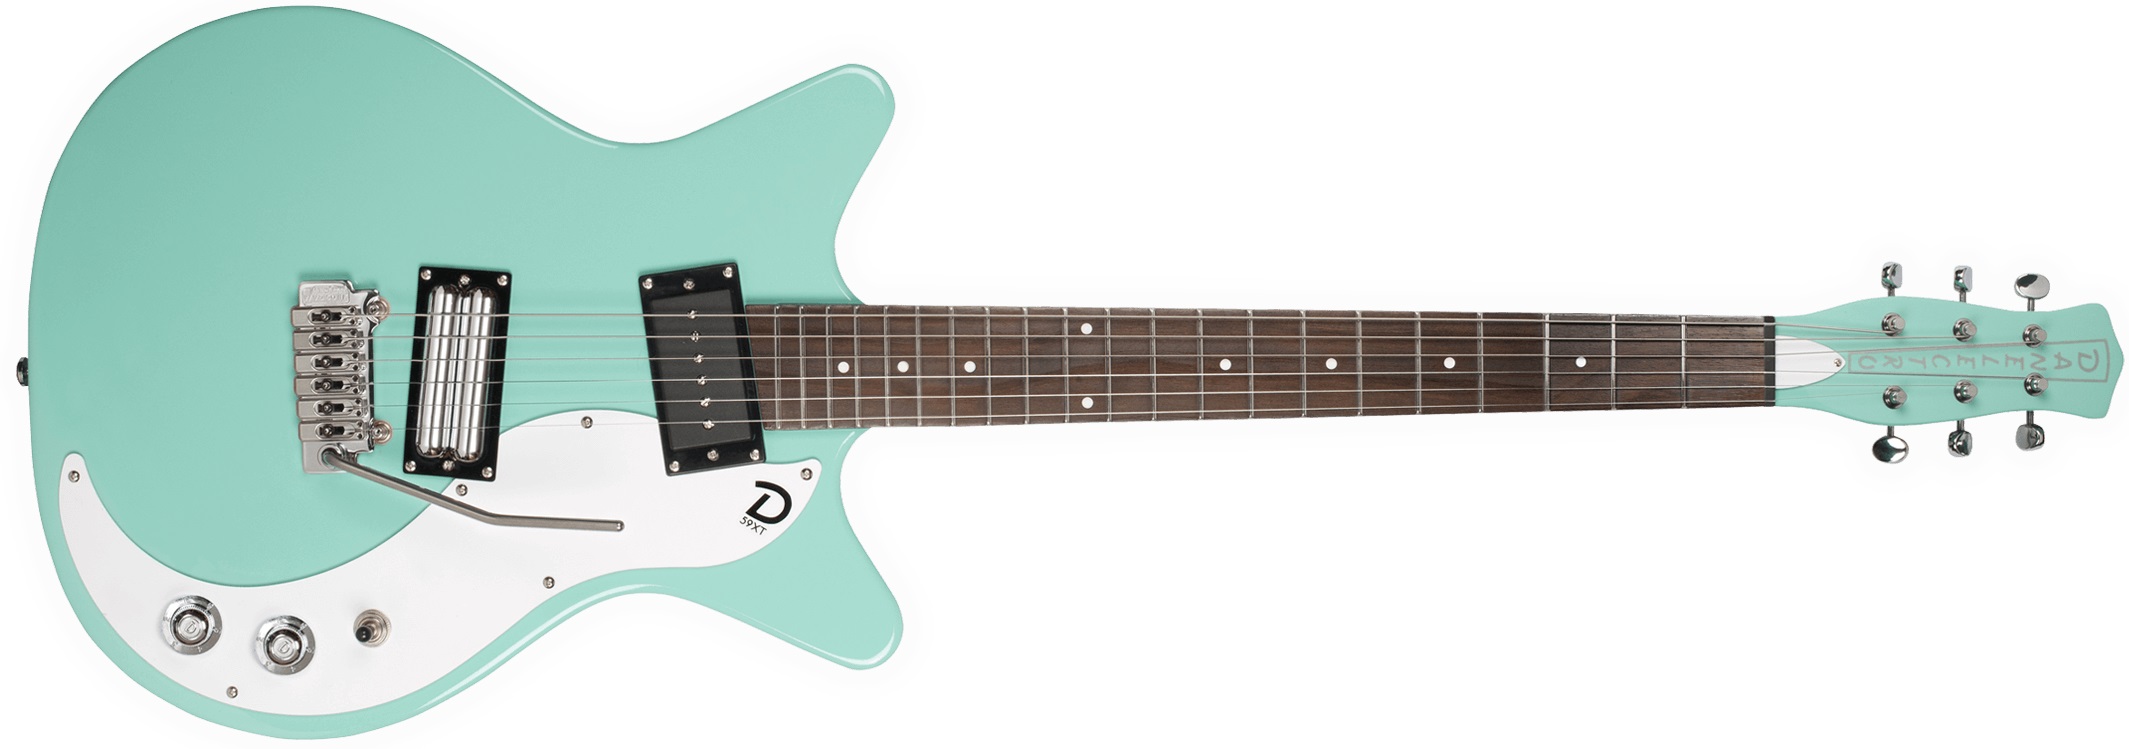 Danelectro 59XT Electric Guitar on a white background